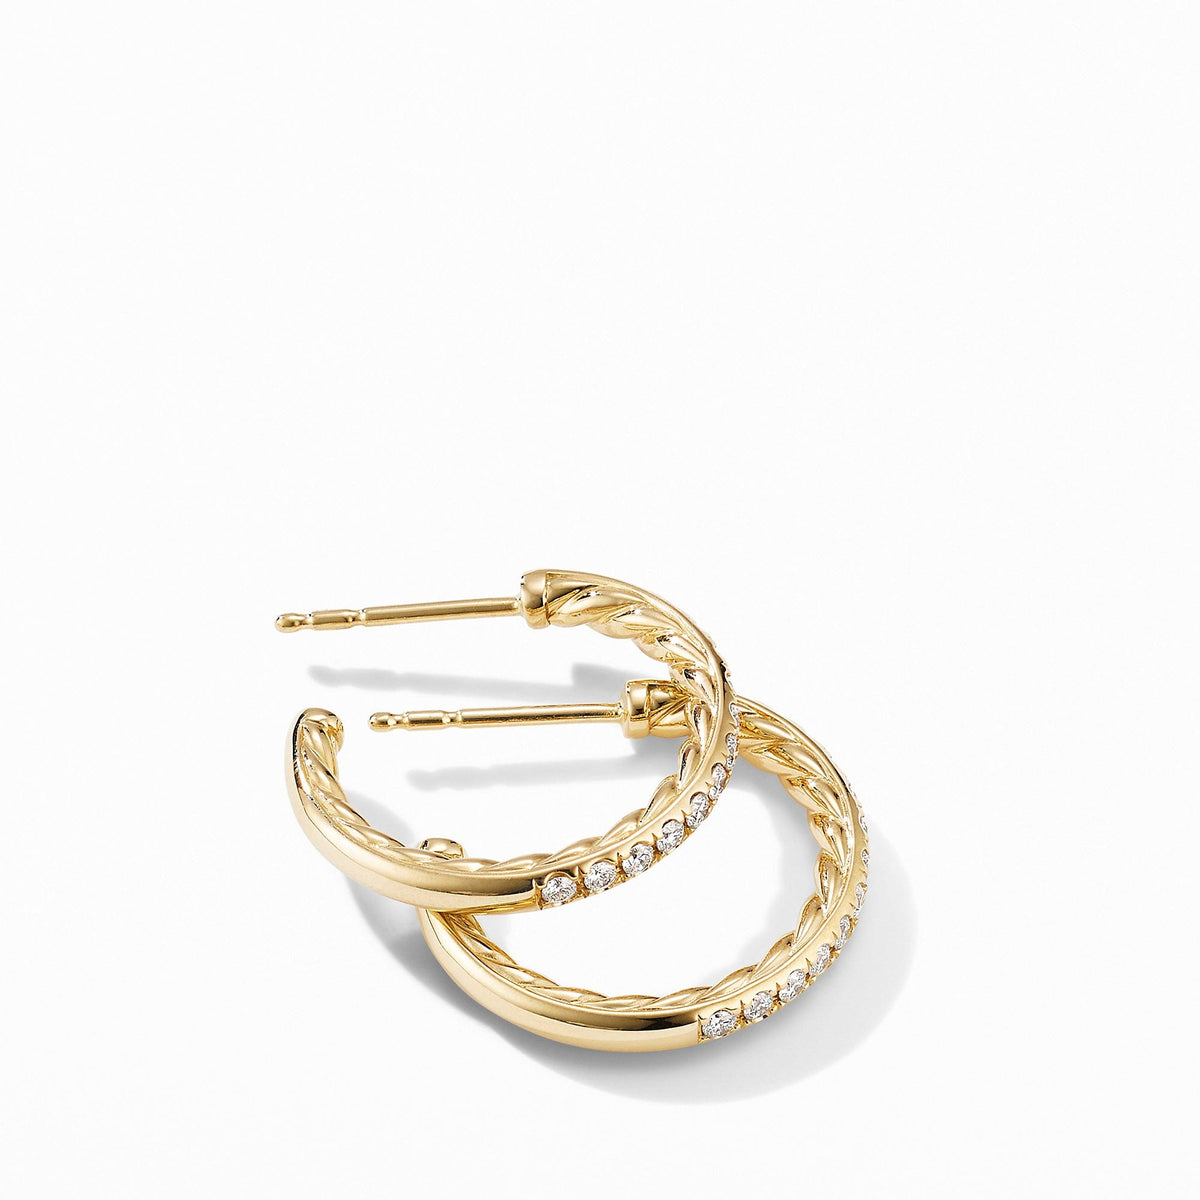 Extra-Small Hoop Earrings in 18K Yellow Gold with Pavé Diamonds